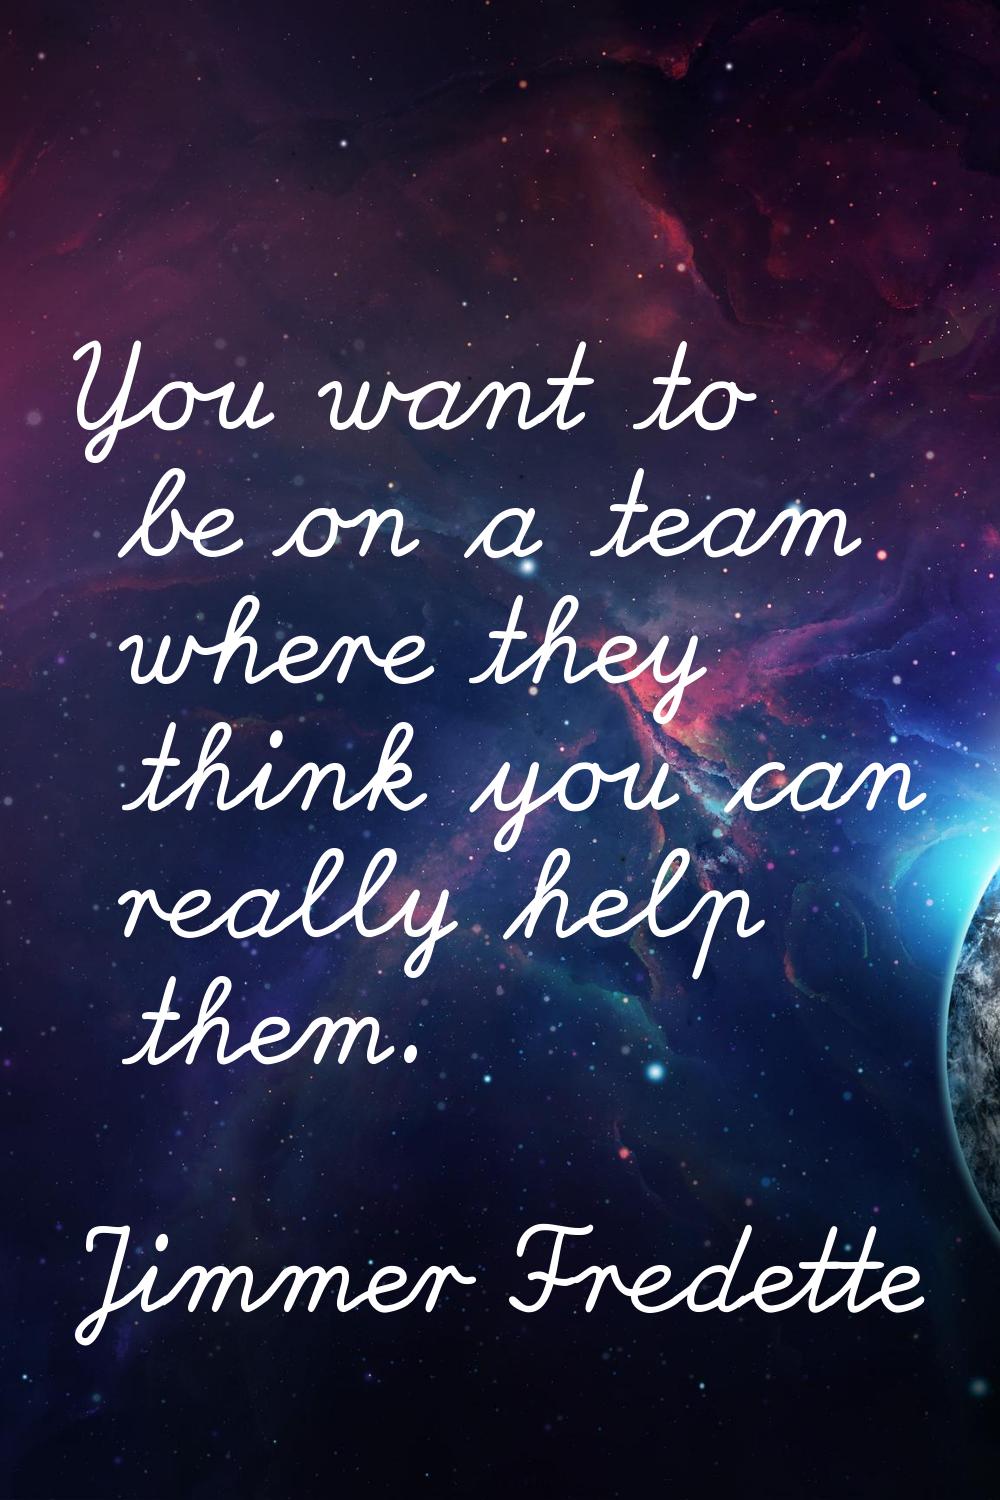 You want to be on a team where they think you can really help them.